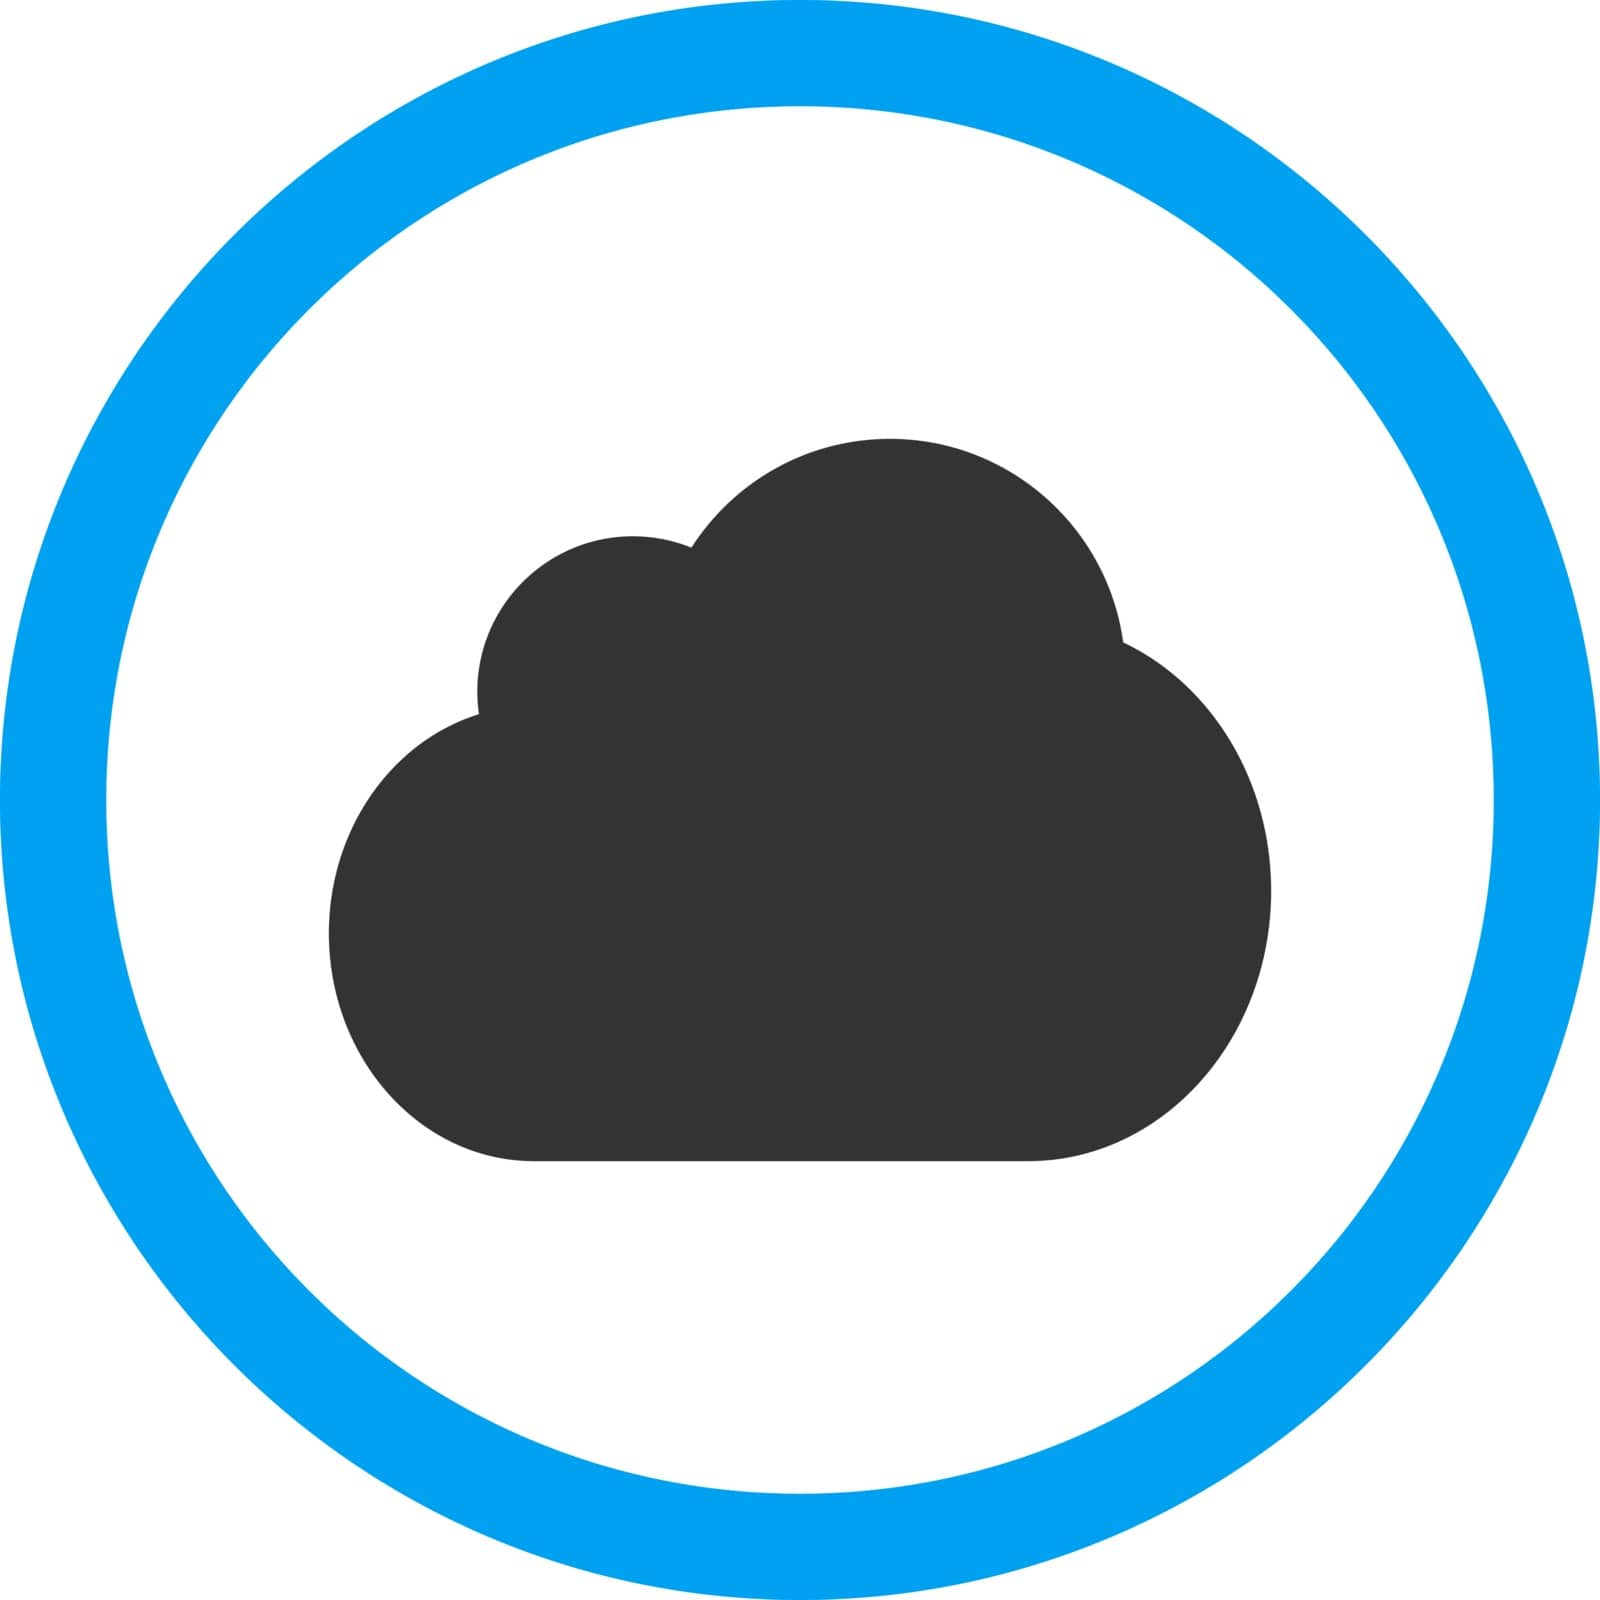 Cloud vector icon. This rounded flat symbol is drawn with blue and gray colors on a white background.